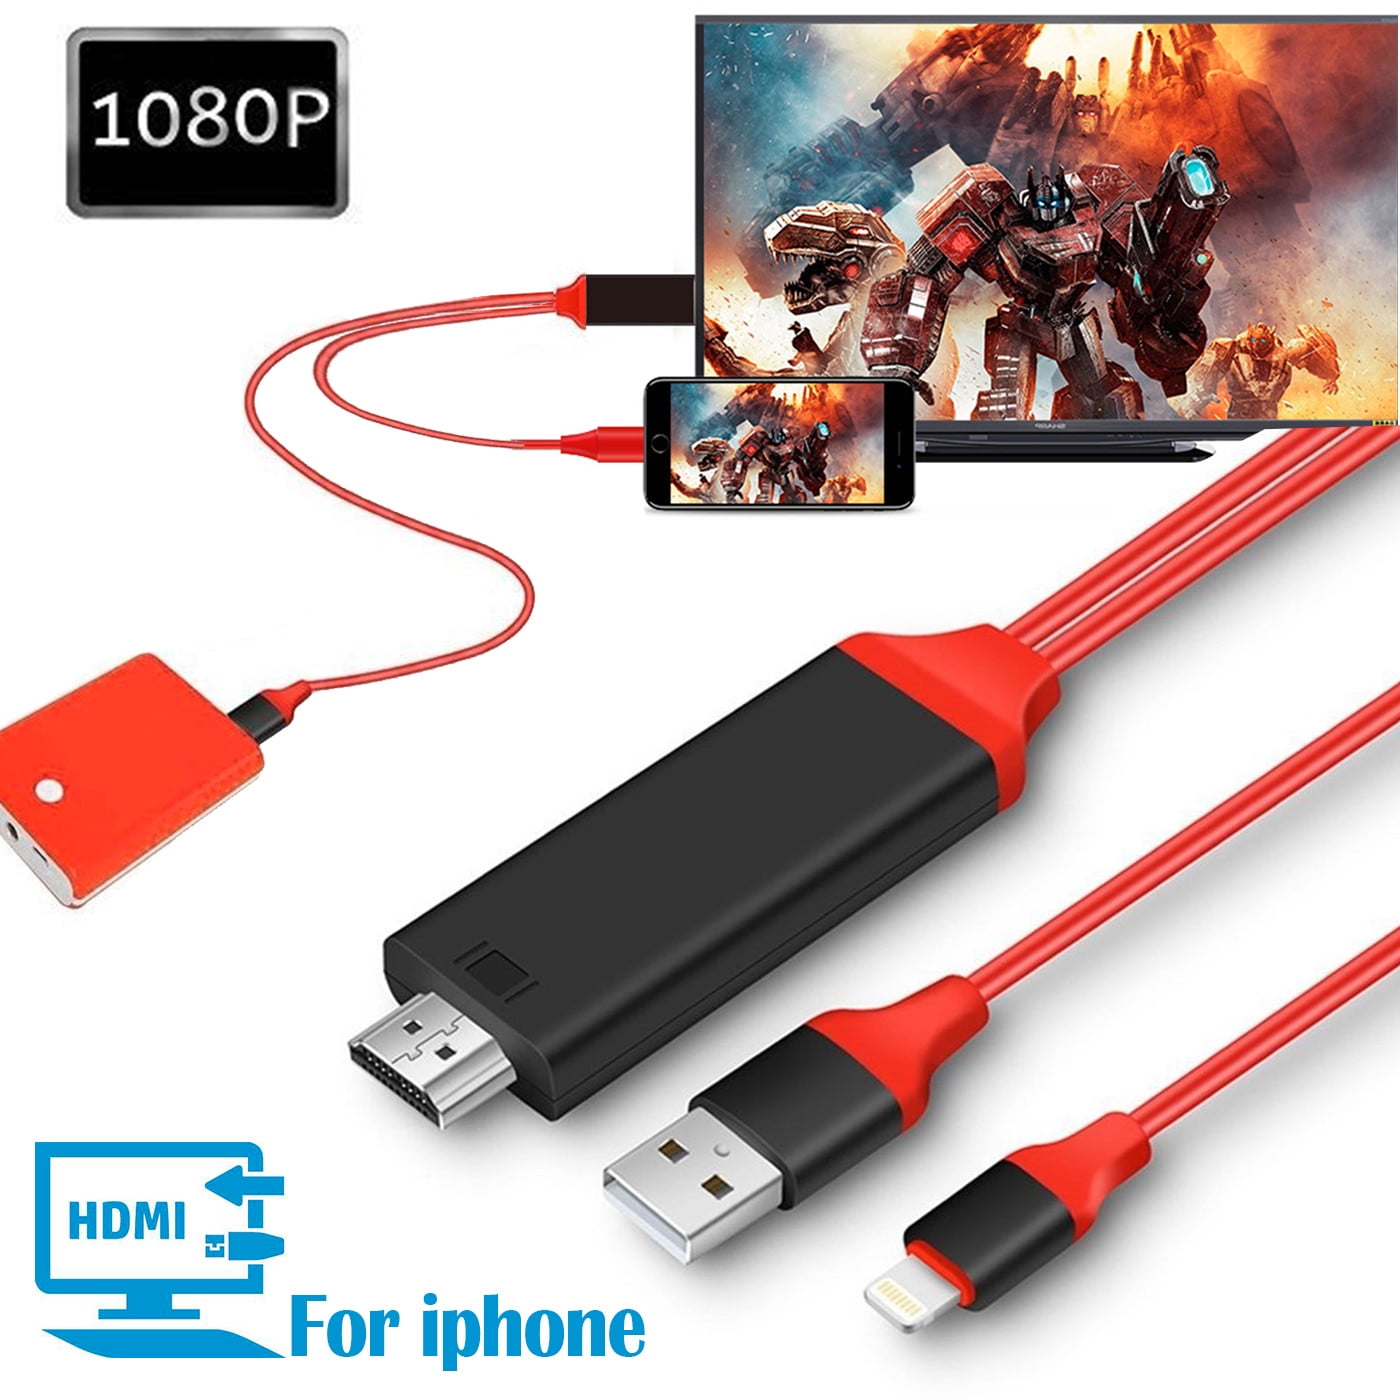 iPad Lightning to HDMI Adapter Cable, 1080P iphone lightning to HDMI Video AV Cable Connector Conversion Adapter for iPhone/iPad/iPod - Walmart.com